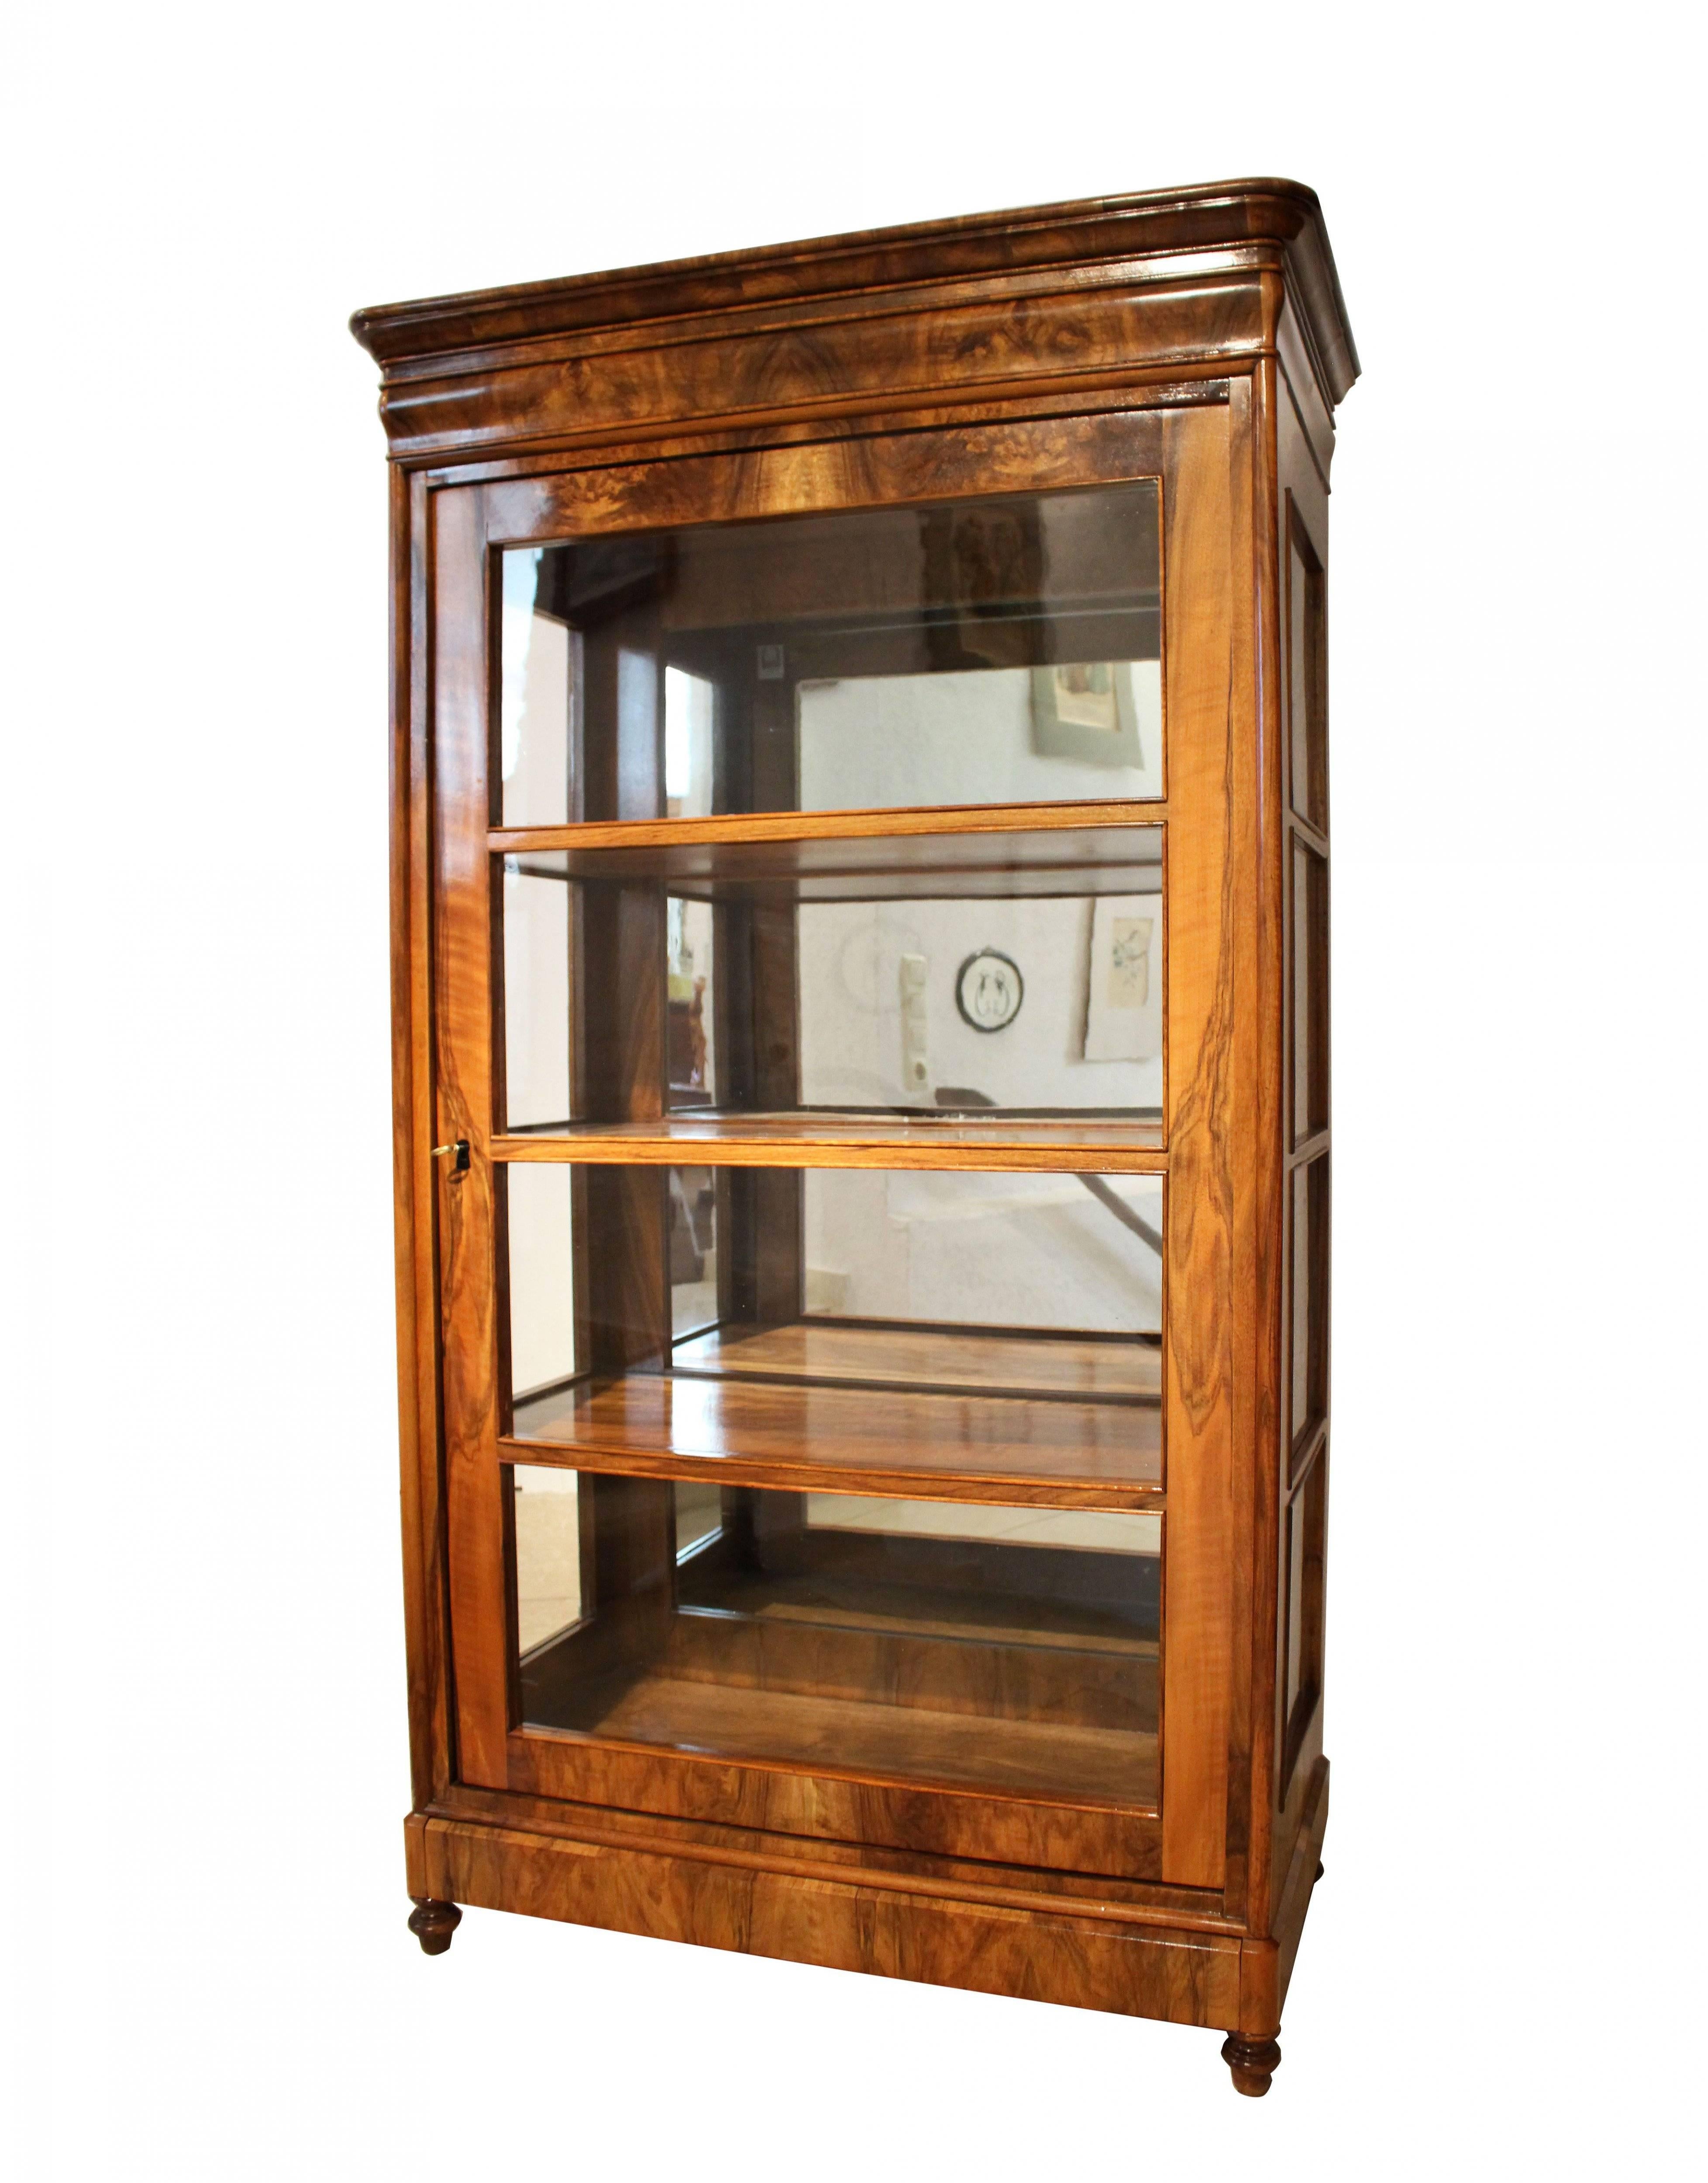 Very nice three-sided showcase with a continuous veneer picture. The top is also veneered. The display case dates from the time of the Biedermeier period, circa 1820. The shelves are made of solid walnut. The base contains a drawer or secret